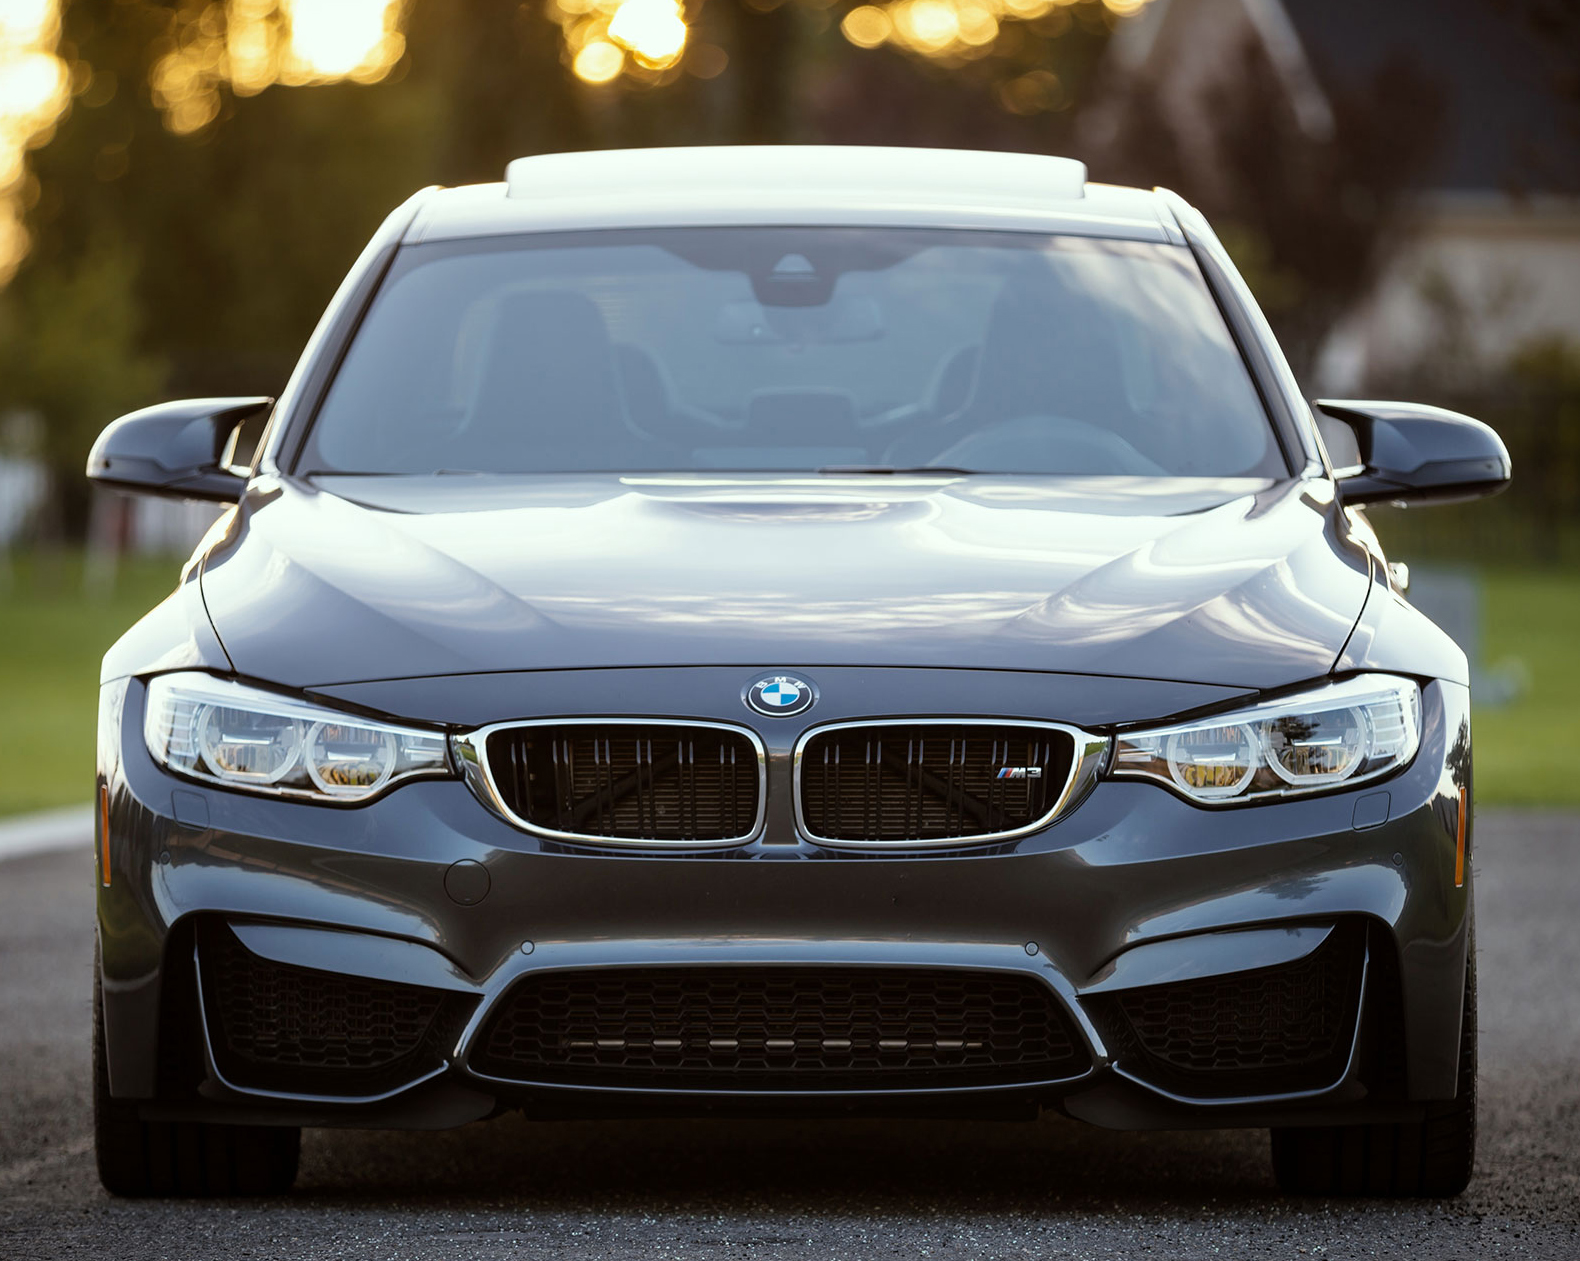 BMW Financial Services lease transfer information